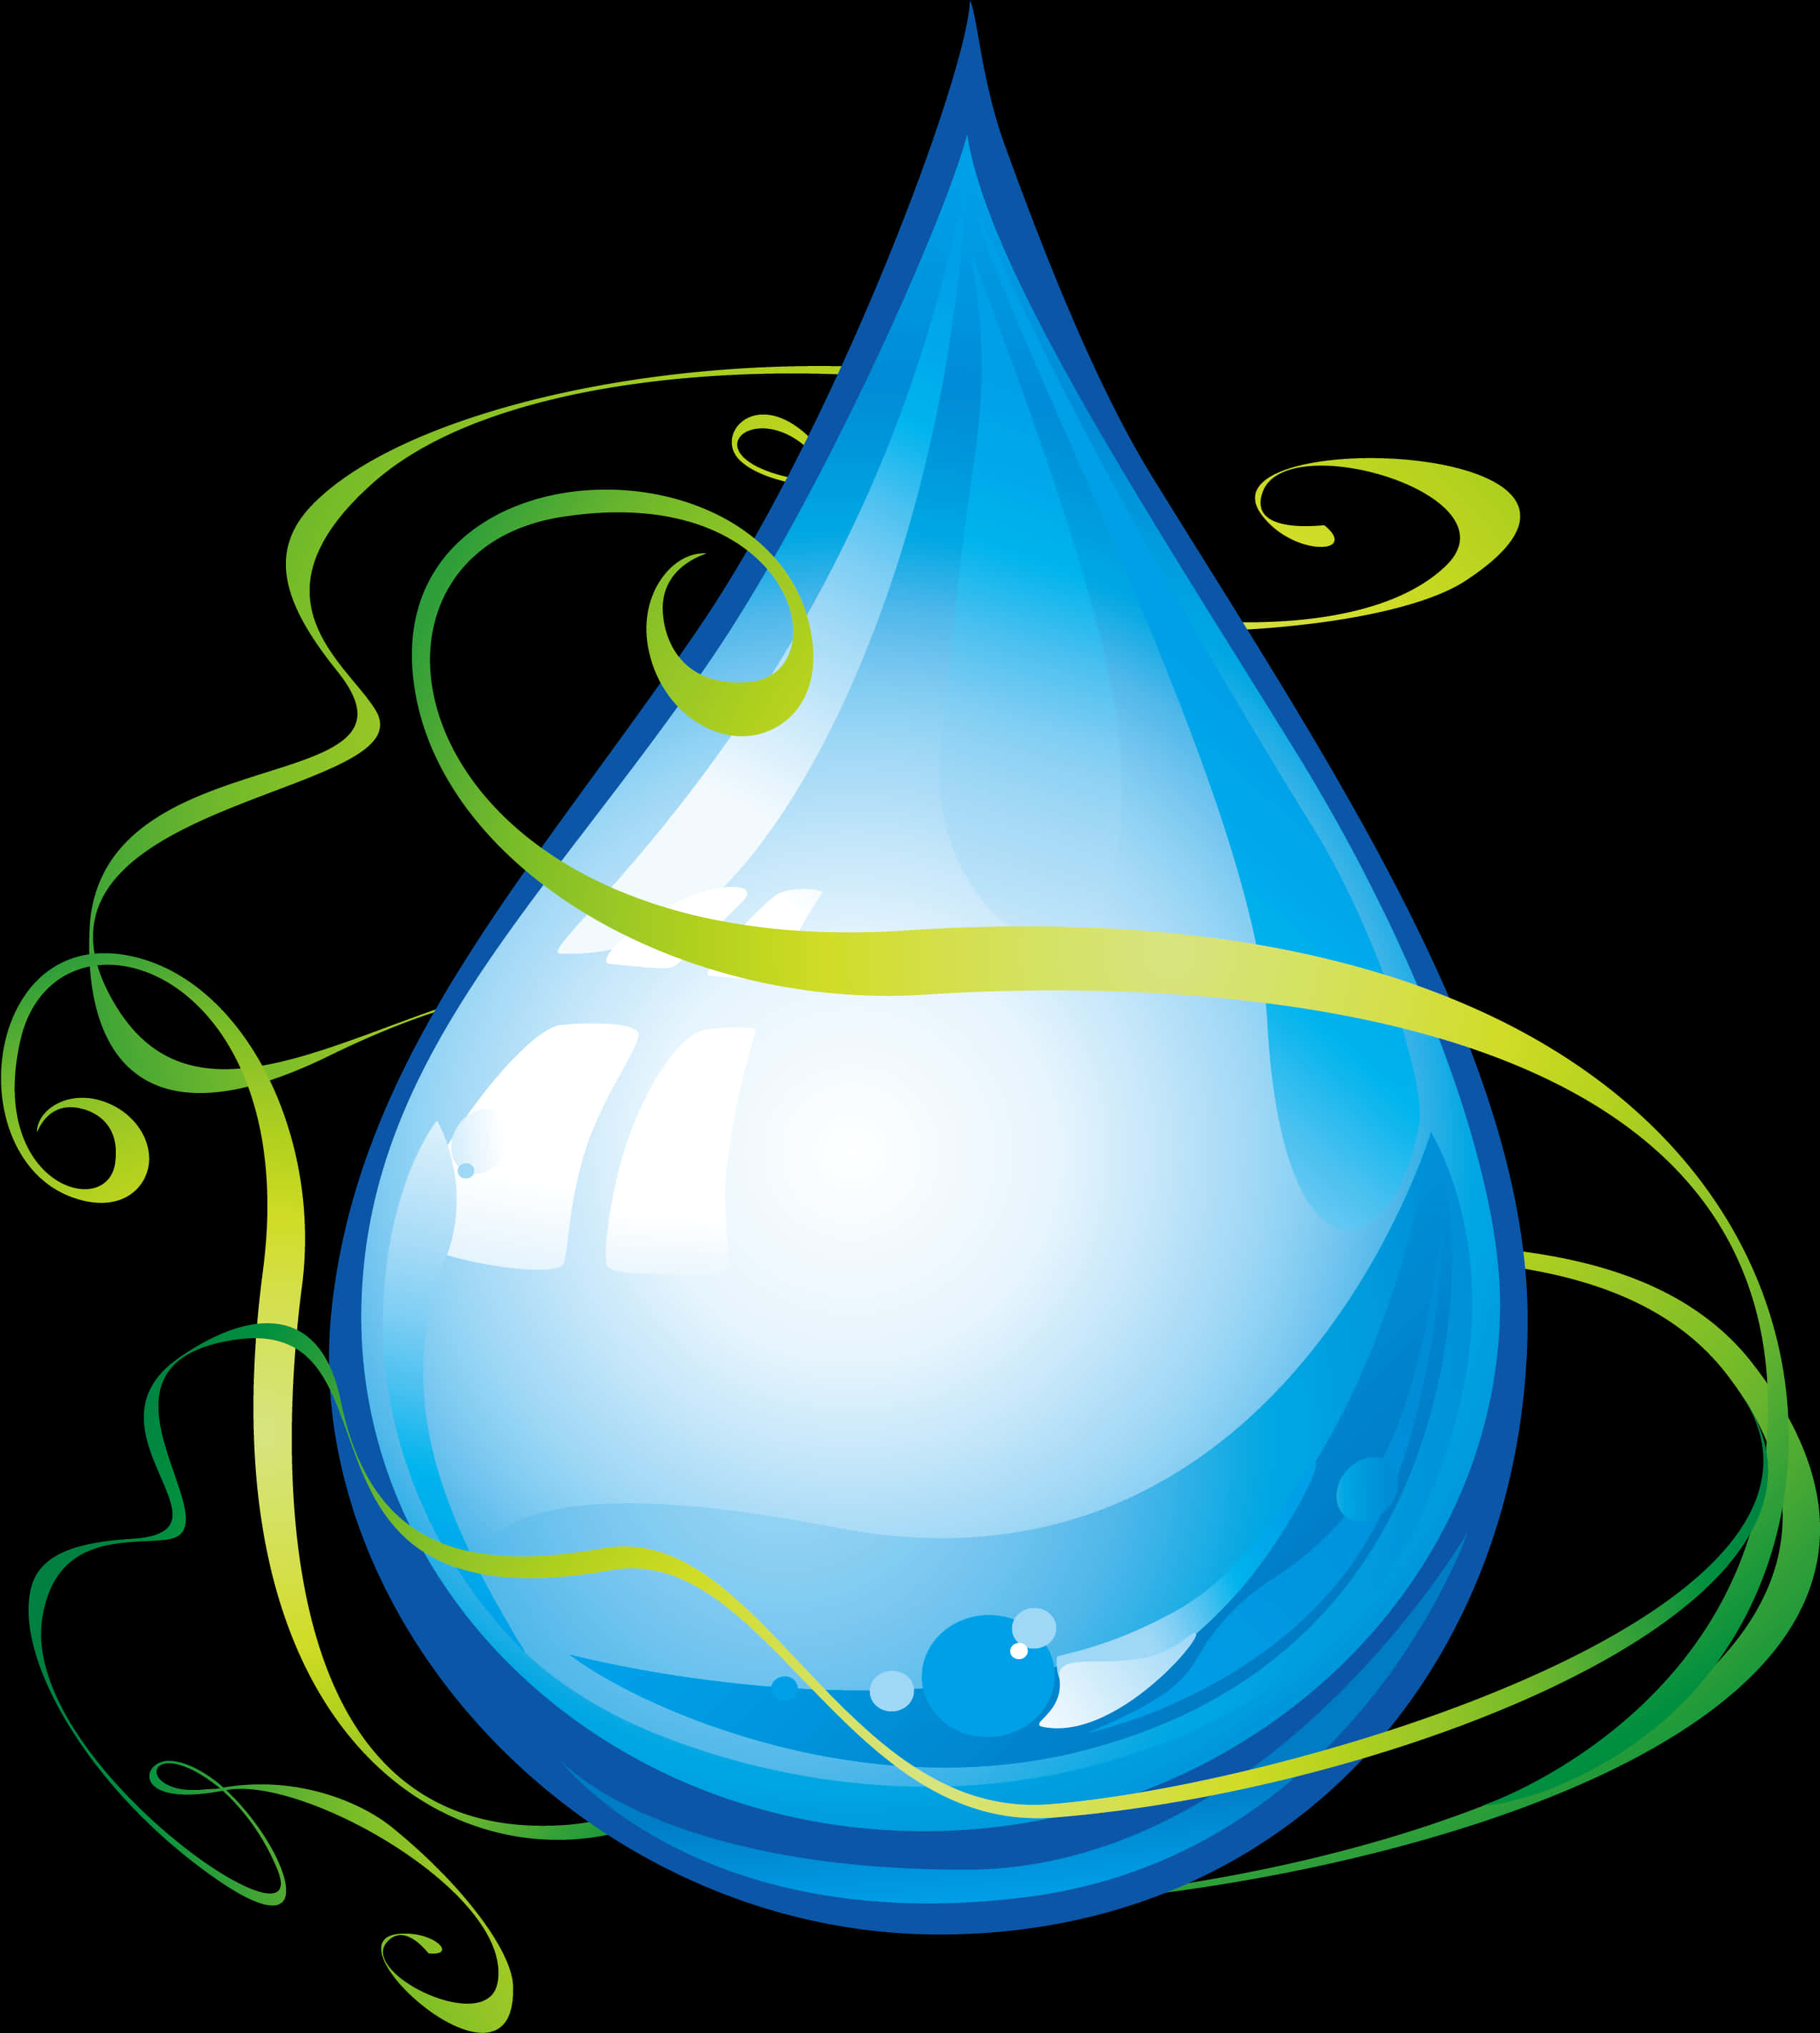 Stylized Water Drop Graphic PNG image